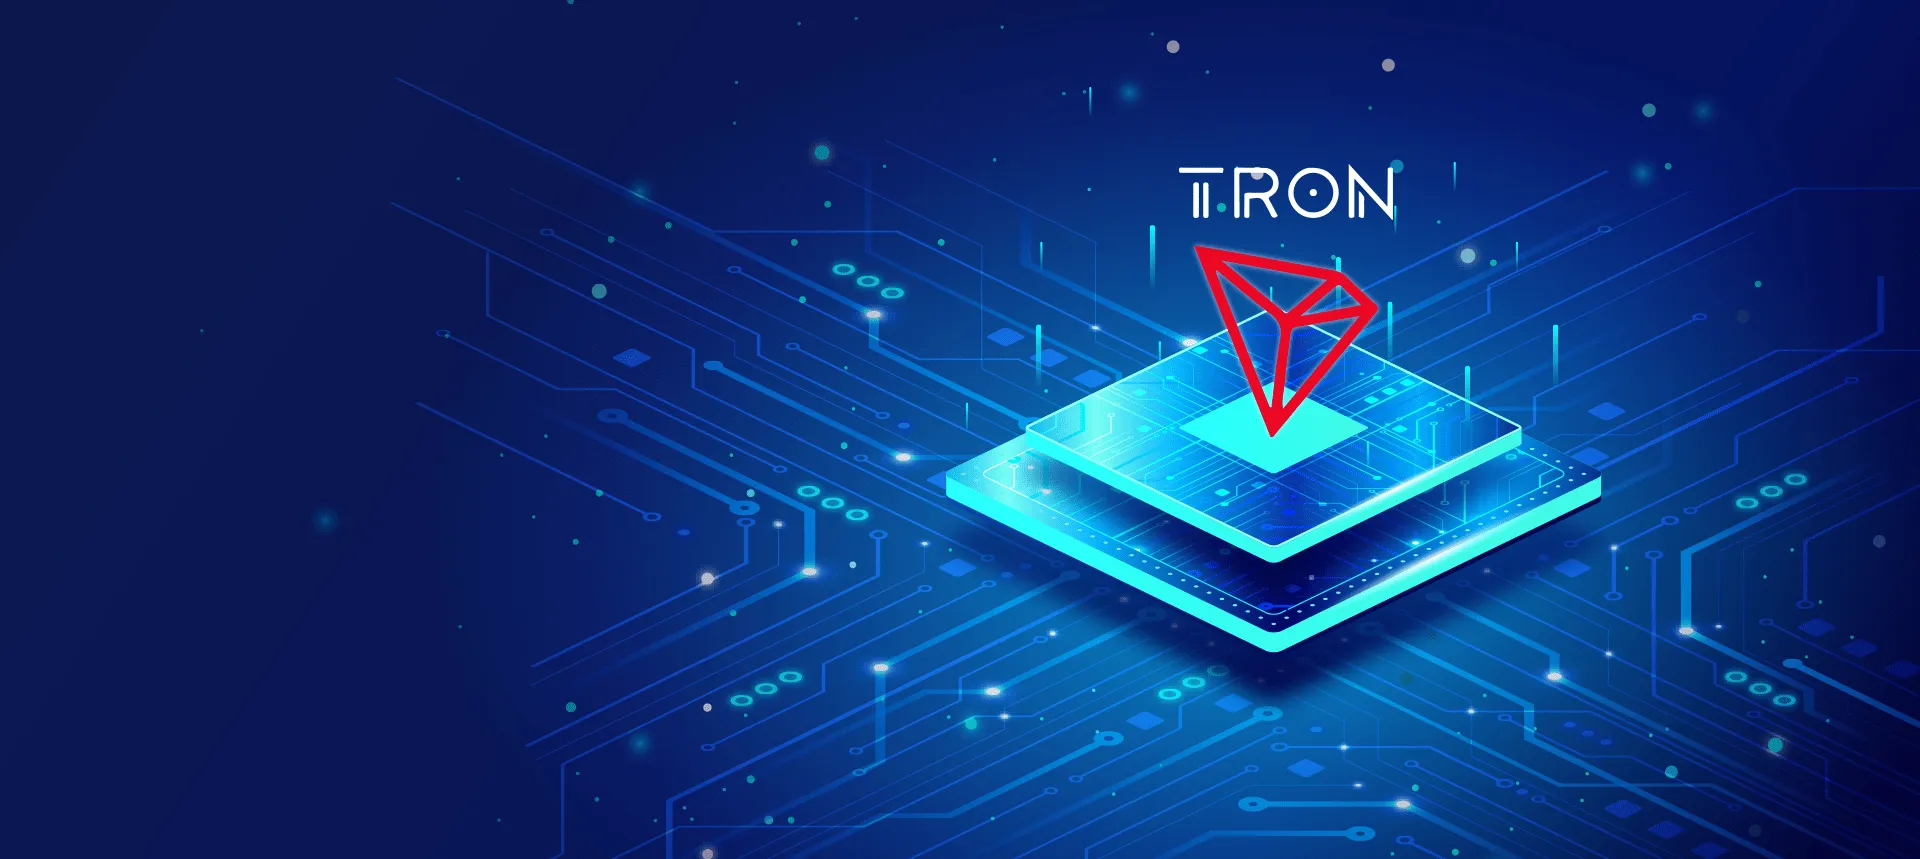 Discover the power and potential of Tronix dapp, the next generation decentralized application platform powered by blockchain technology. Tron's dapps are revolutionizing the way businesses operate, empowering users, and disrupting traditional business models.